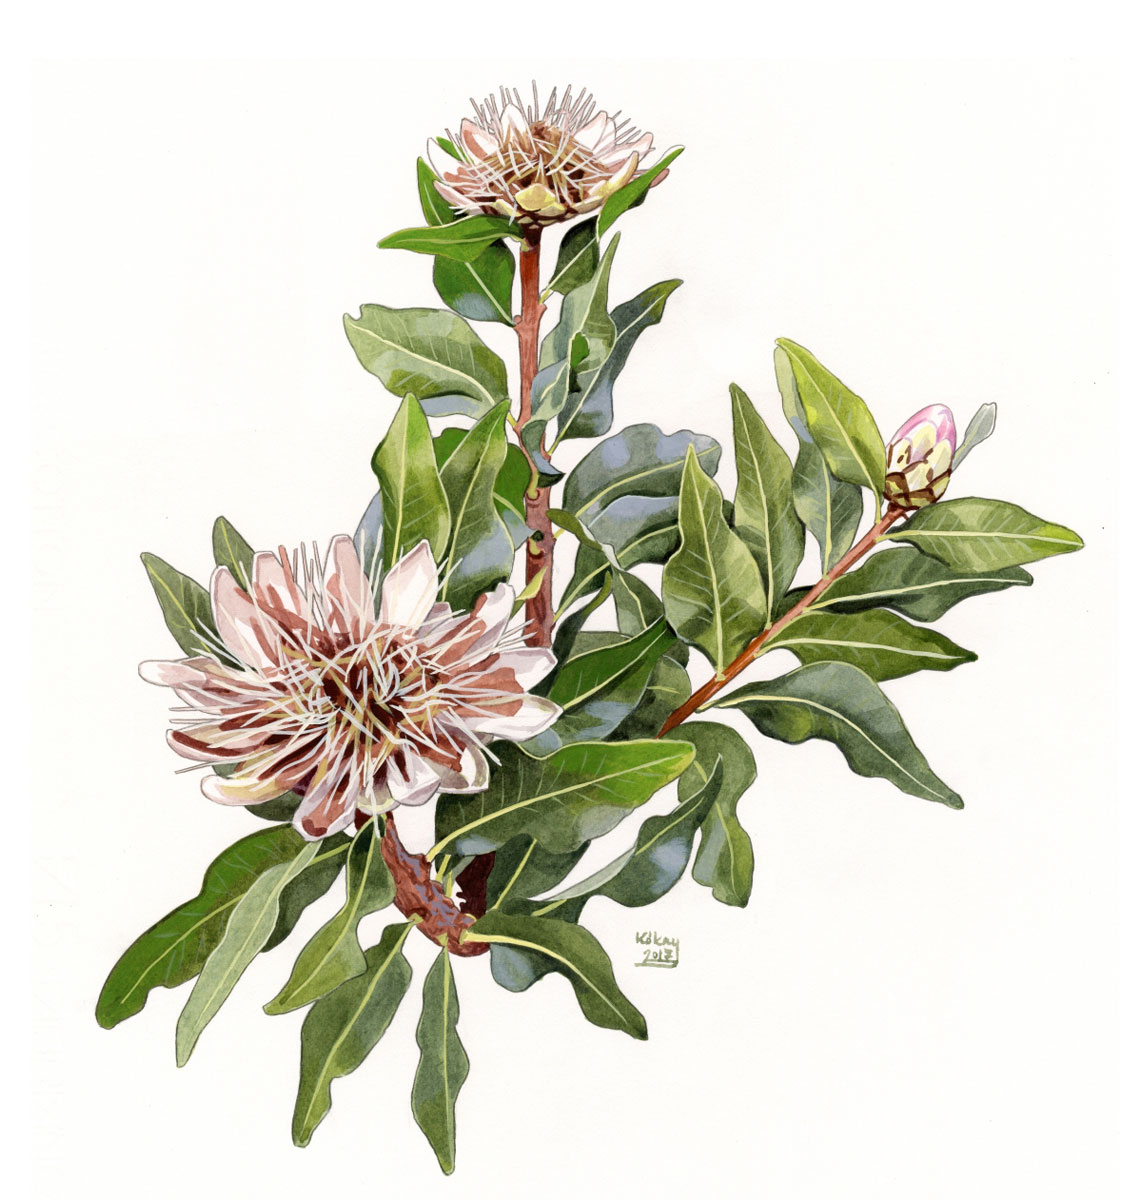 Protea madiensis occidentalis, watercolour and bodycolour on paper